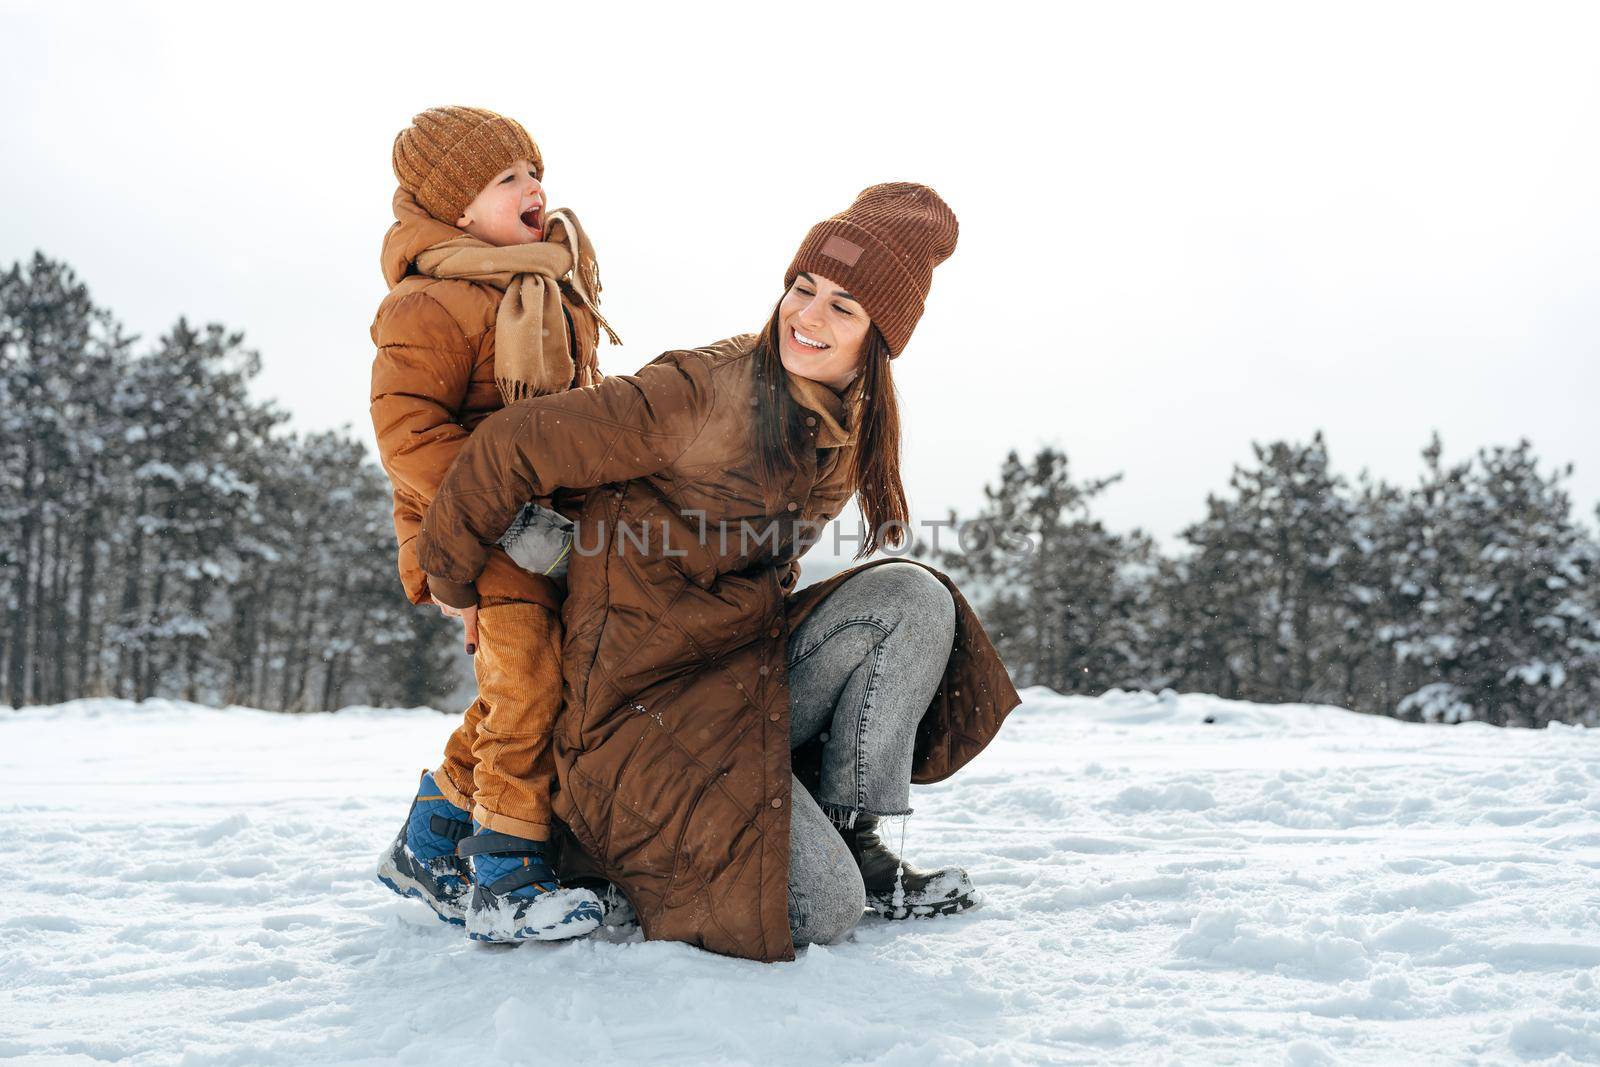 Woman with a little son on a winter hike in the snowy forest together